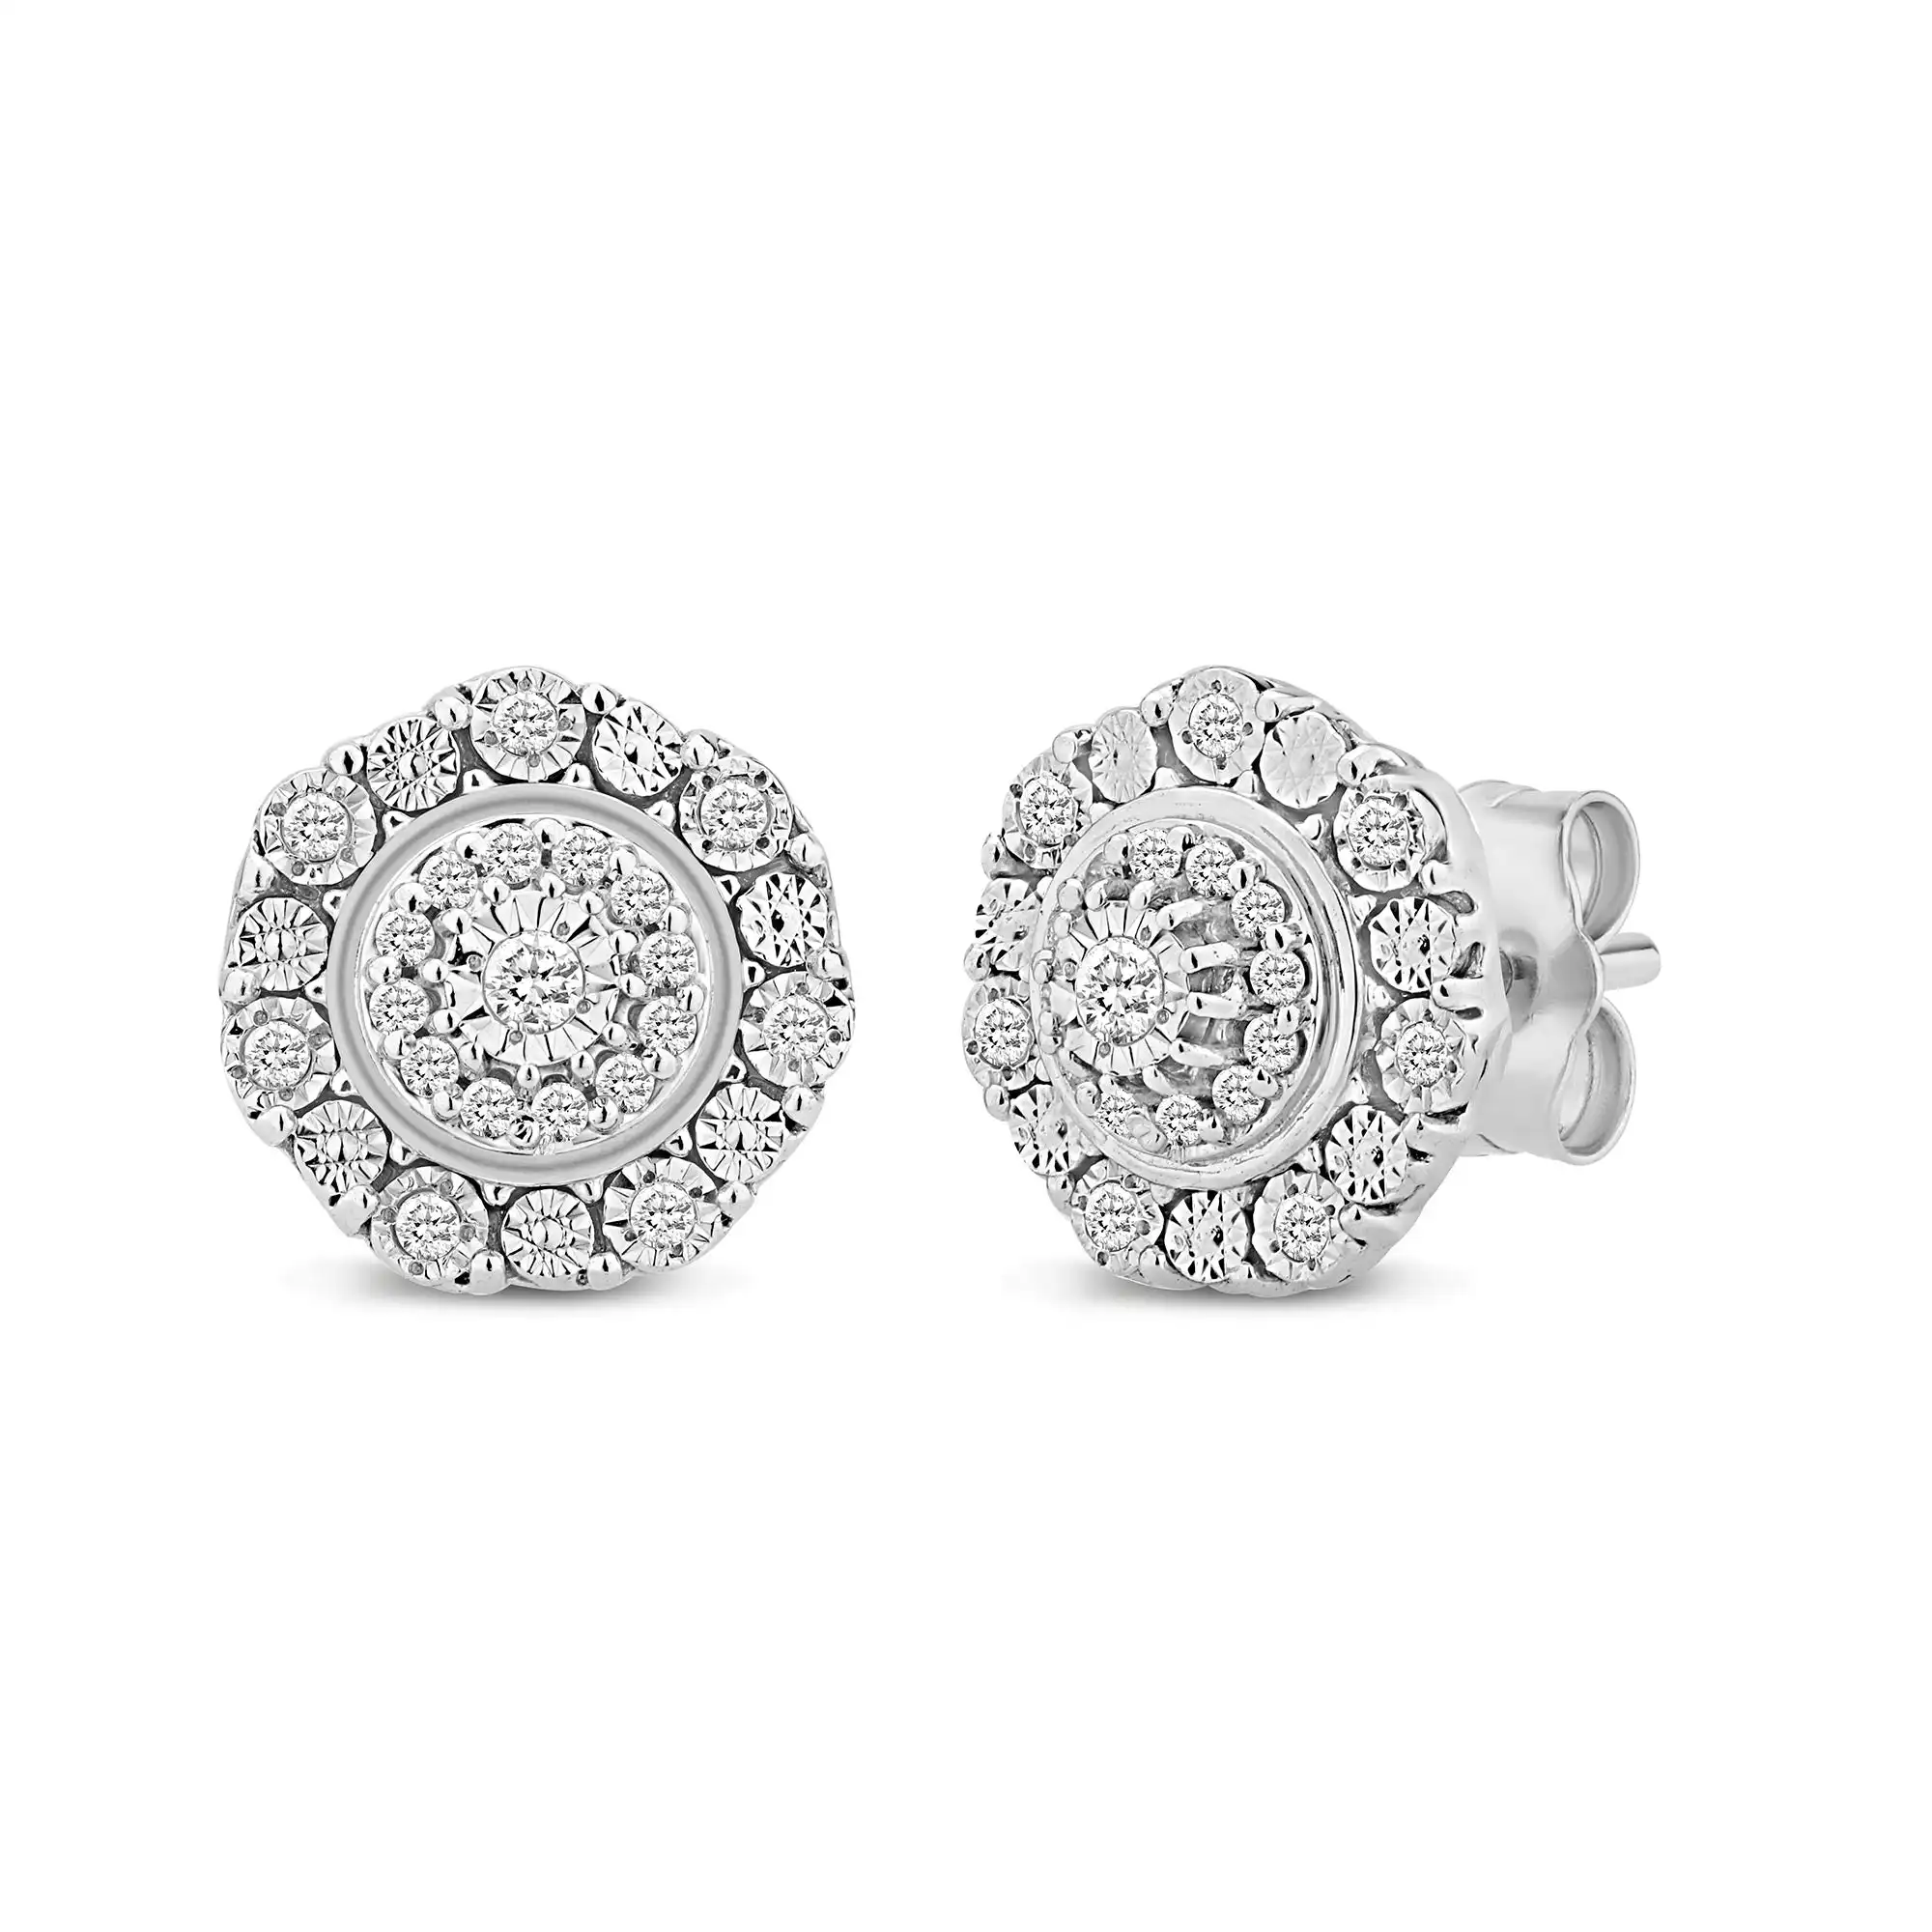 Miracle Halo Earrings with 0.15ct of Diamonds in Sterling Silver